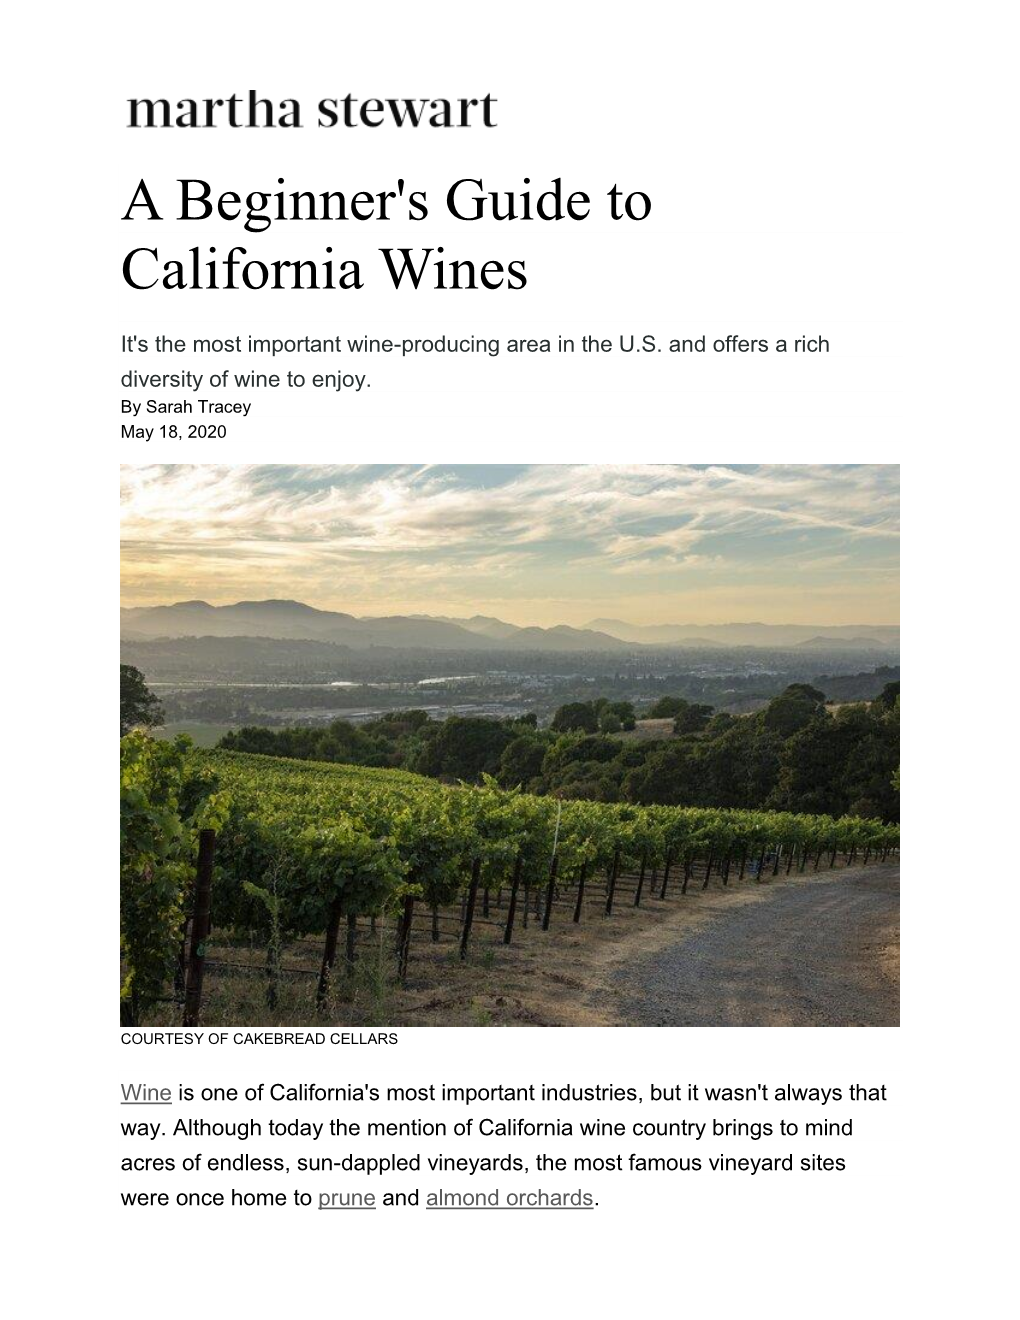 A Beginner's Guide to California Wines